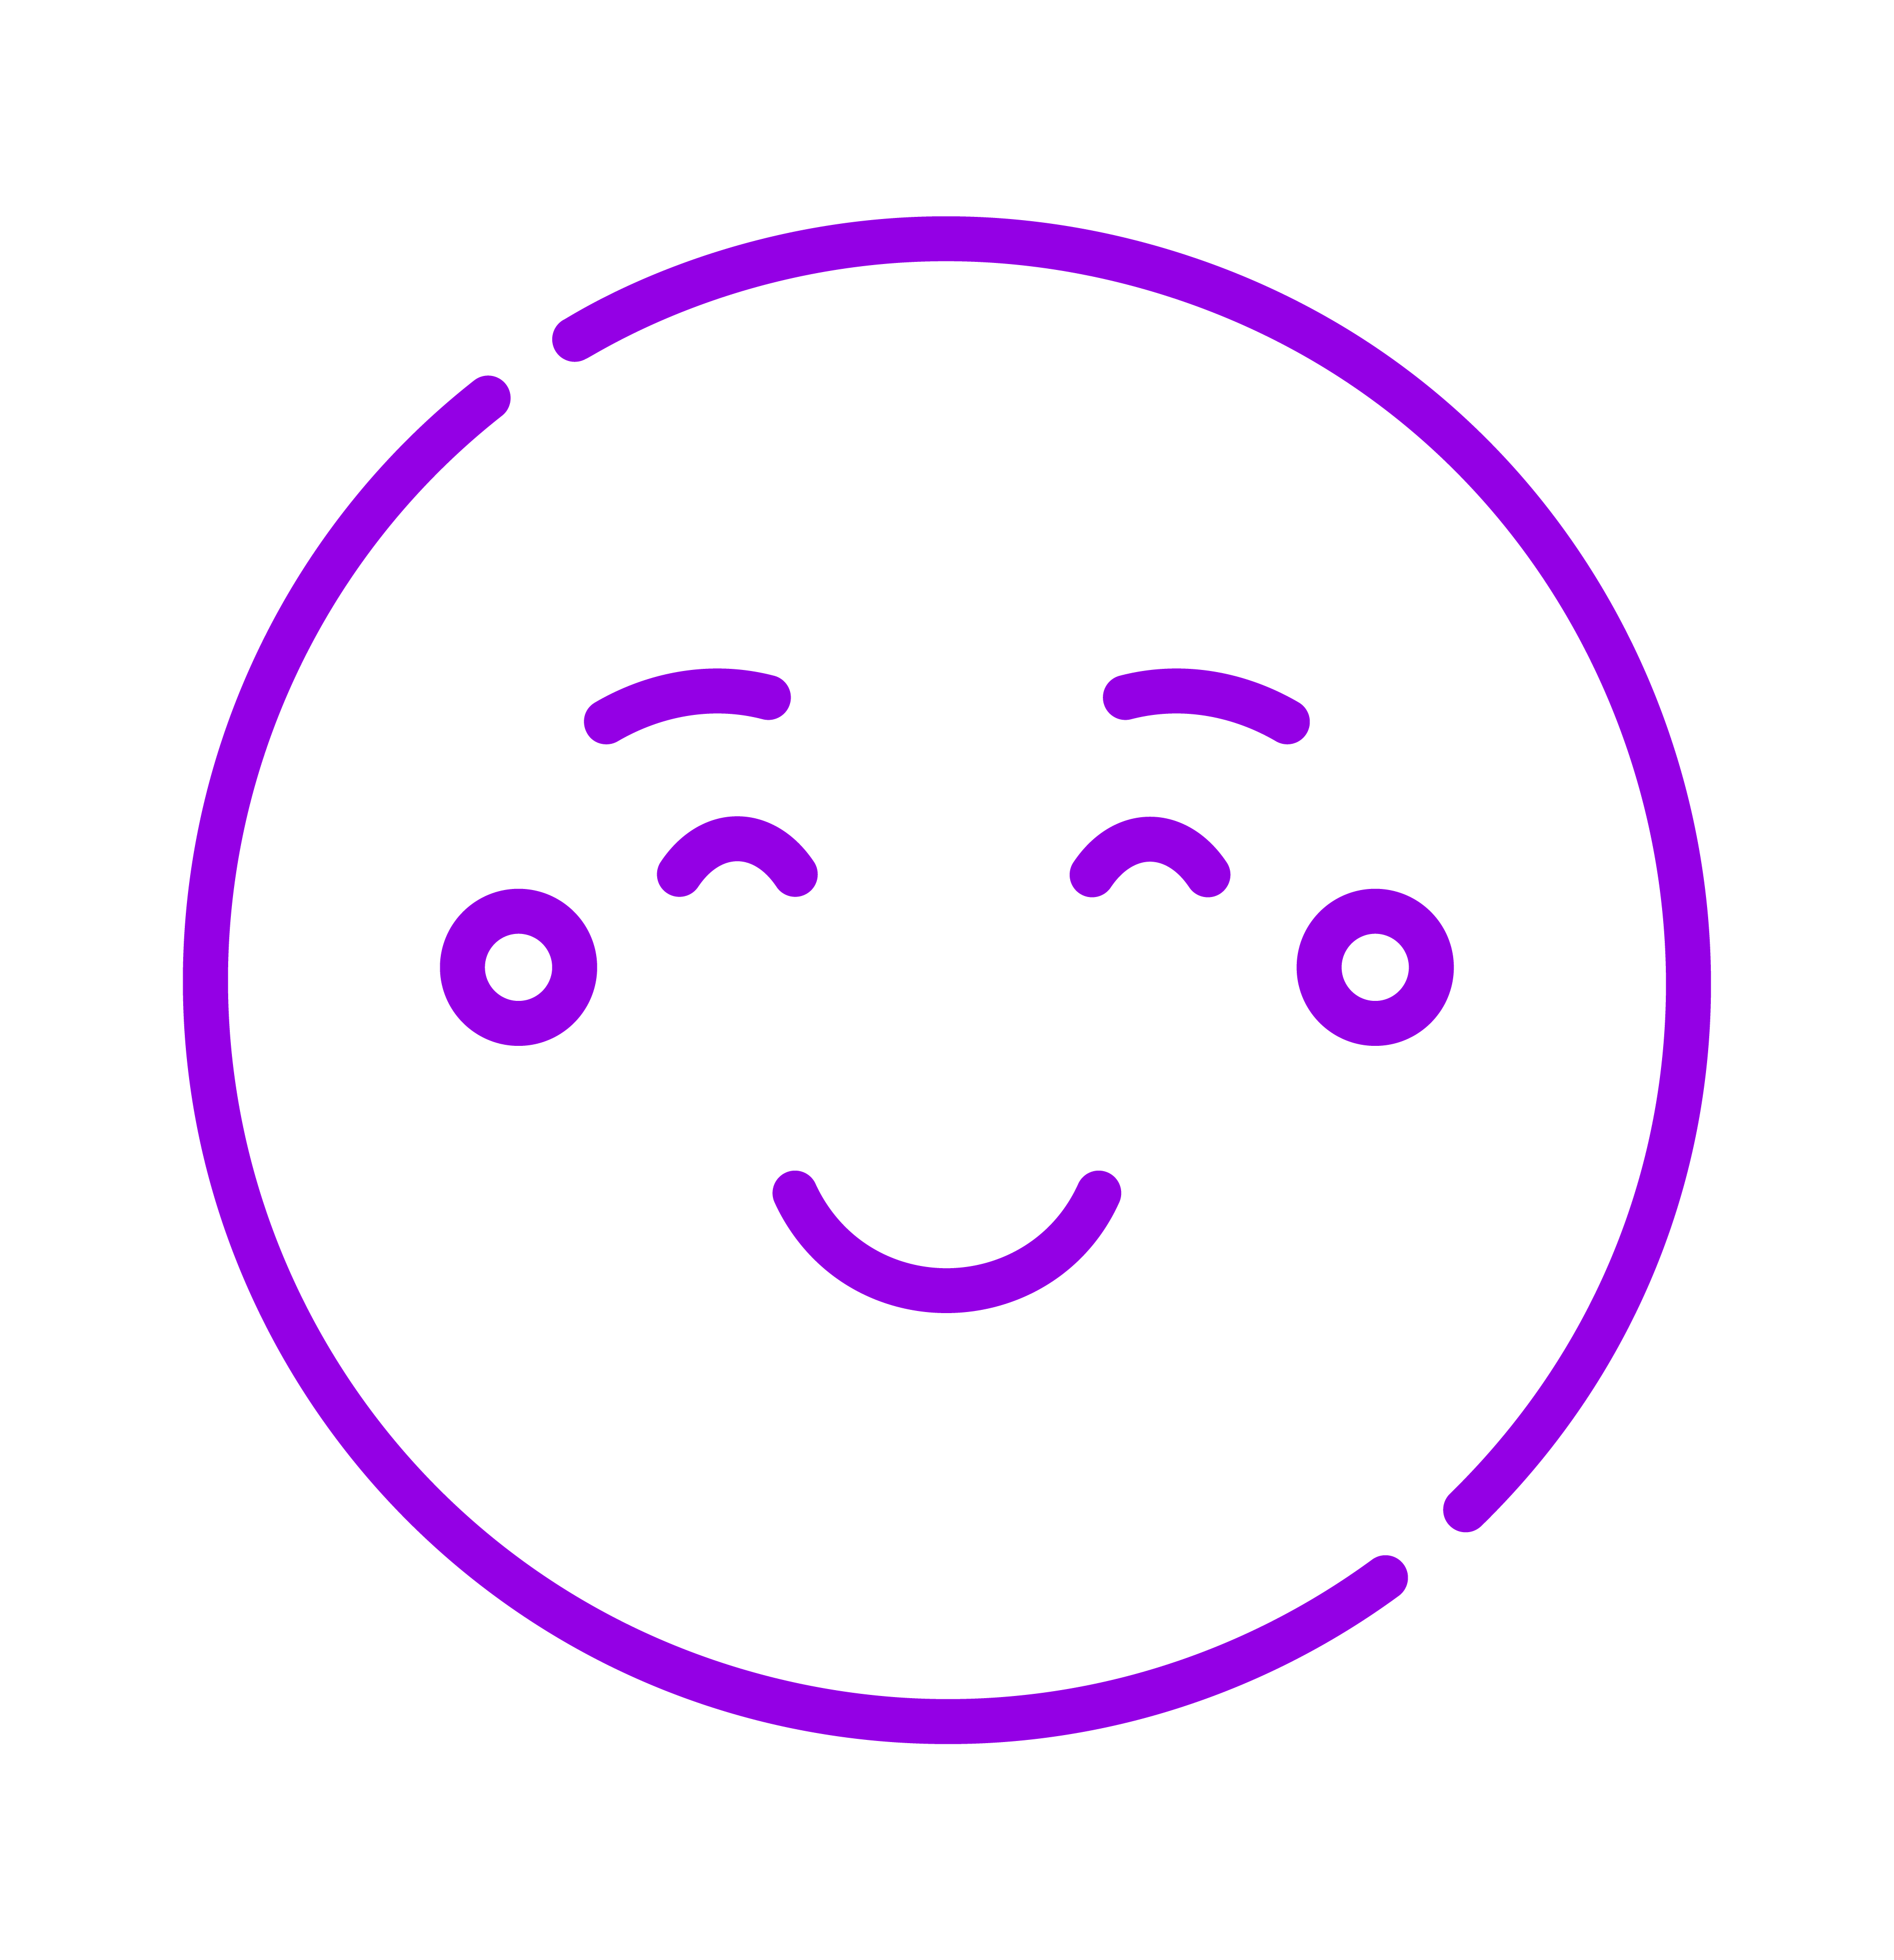 A purple smiley face icon on a transparent background.